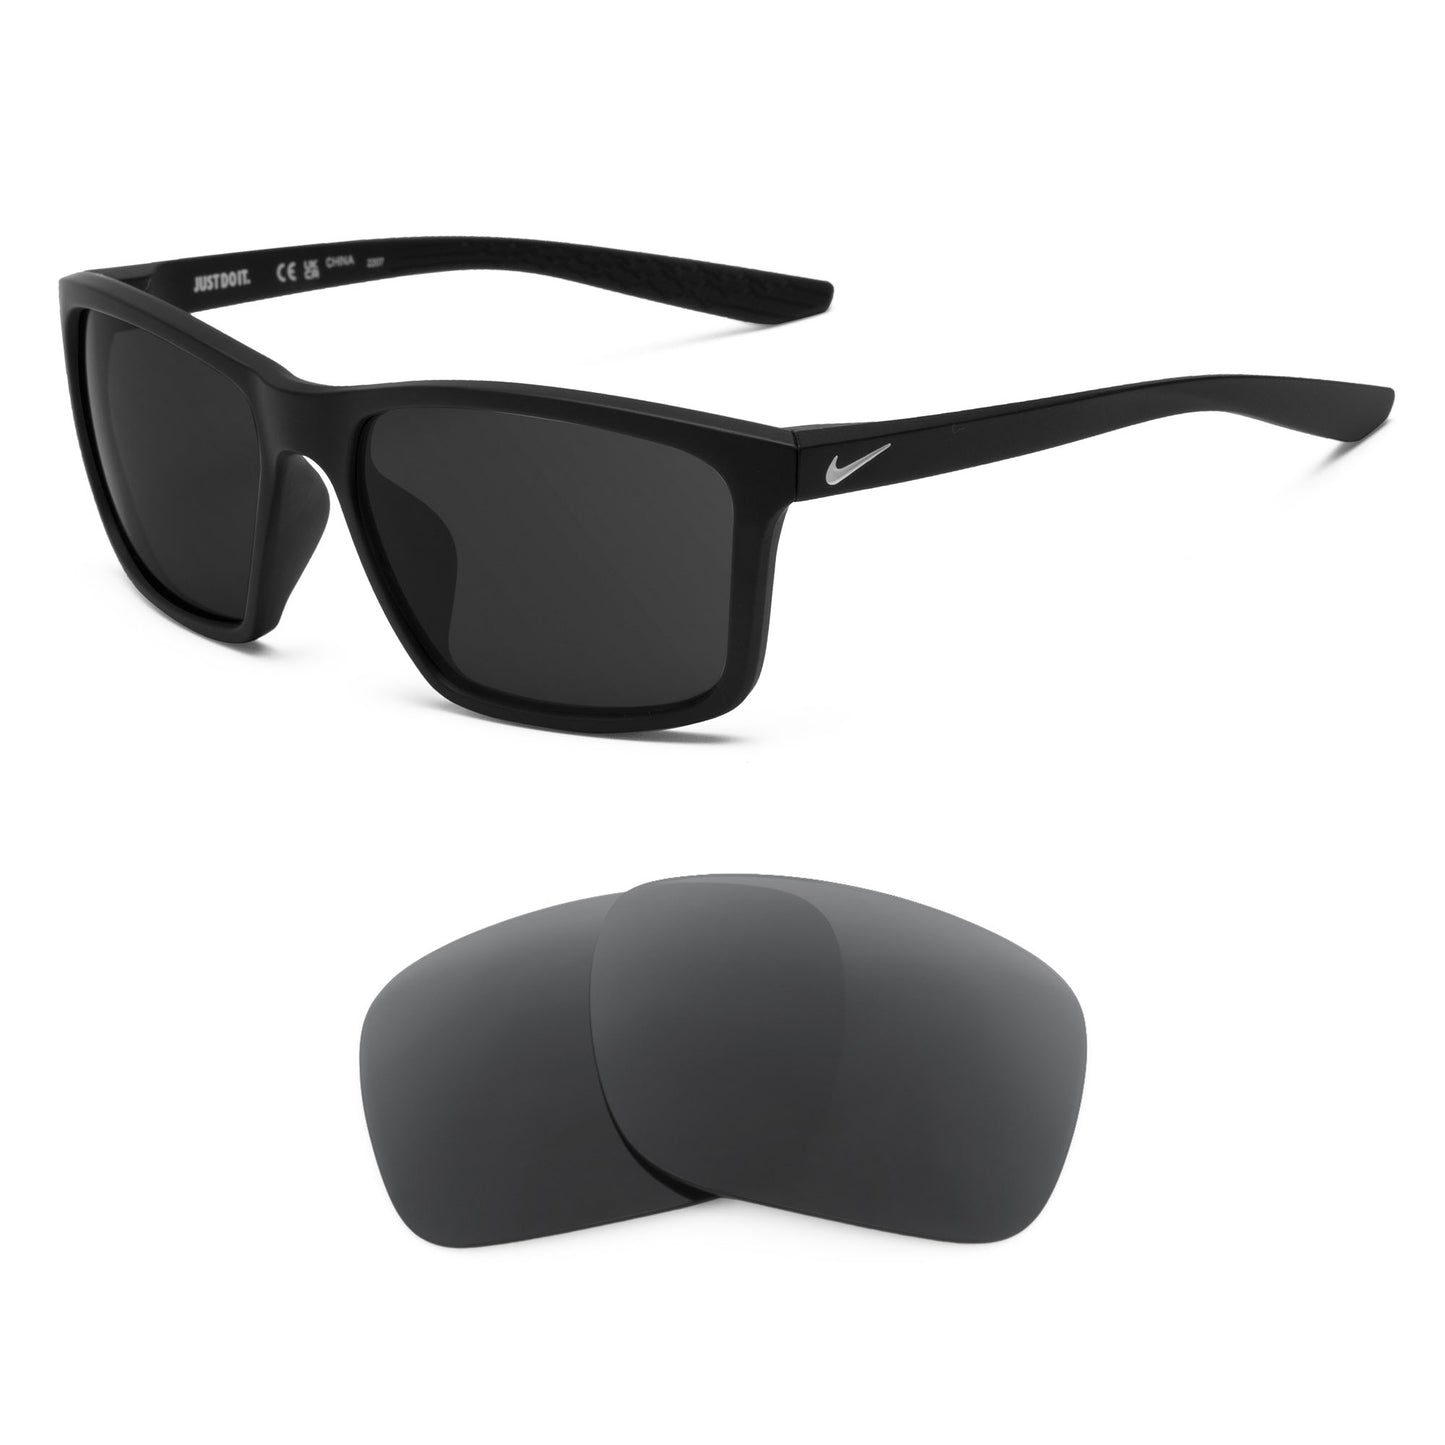 Nike Valiant sunglasses with replacement lenses